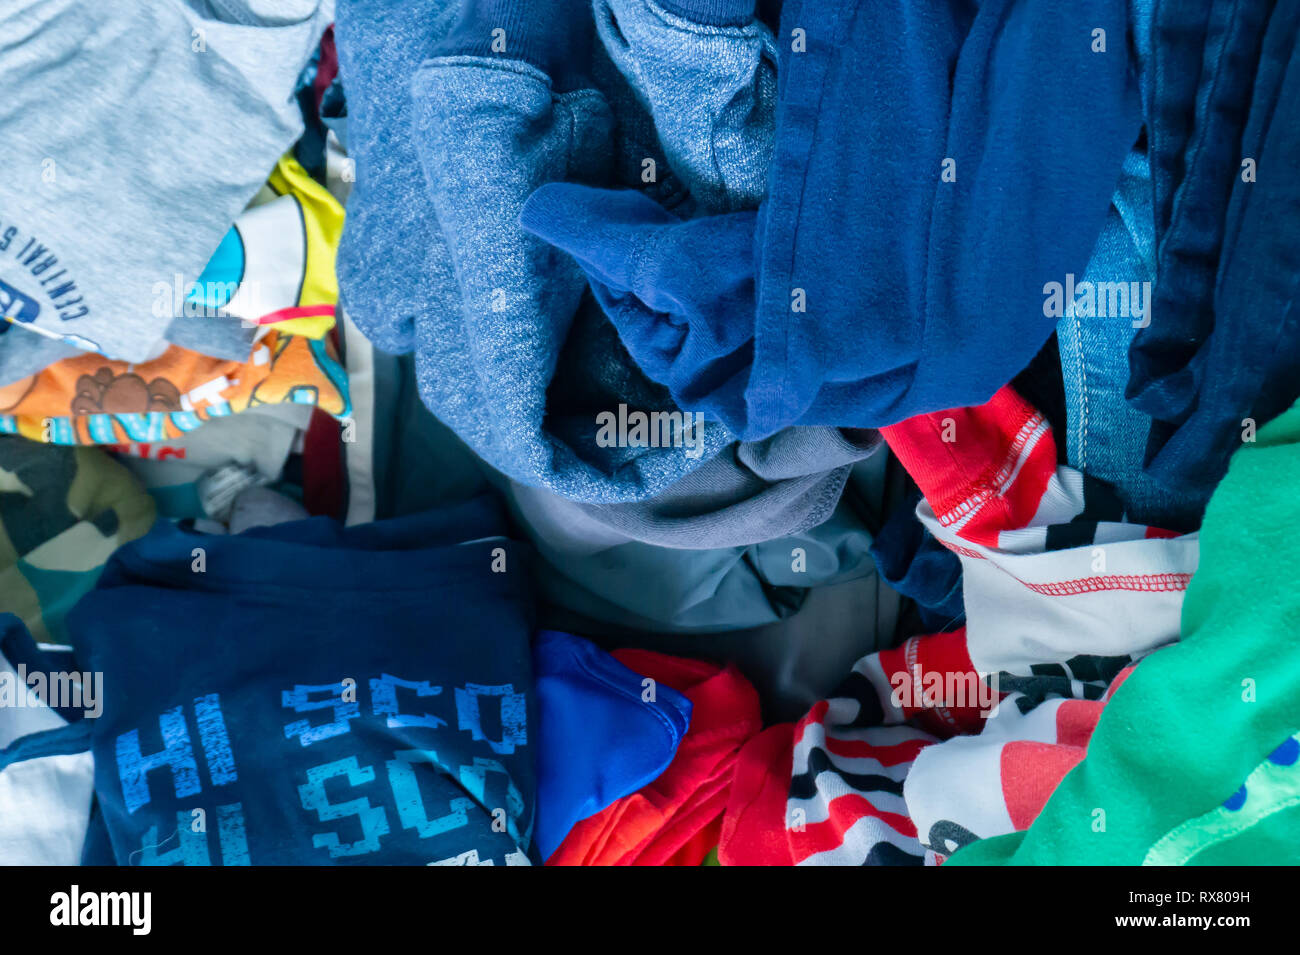 Little boy's clothing pile representing clothing donation, kid's drawer, cleaning up, pile of clothes, disorganization and cleaning up. Stock Photo